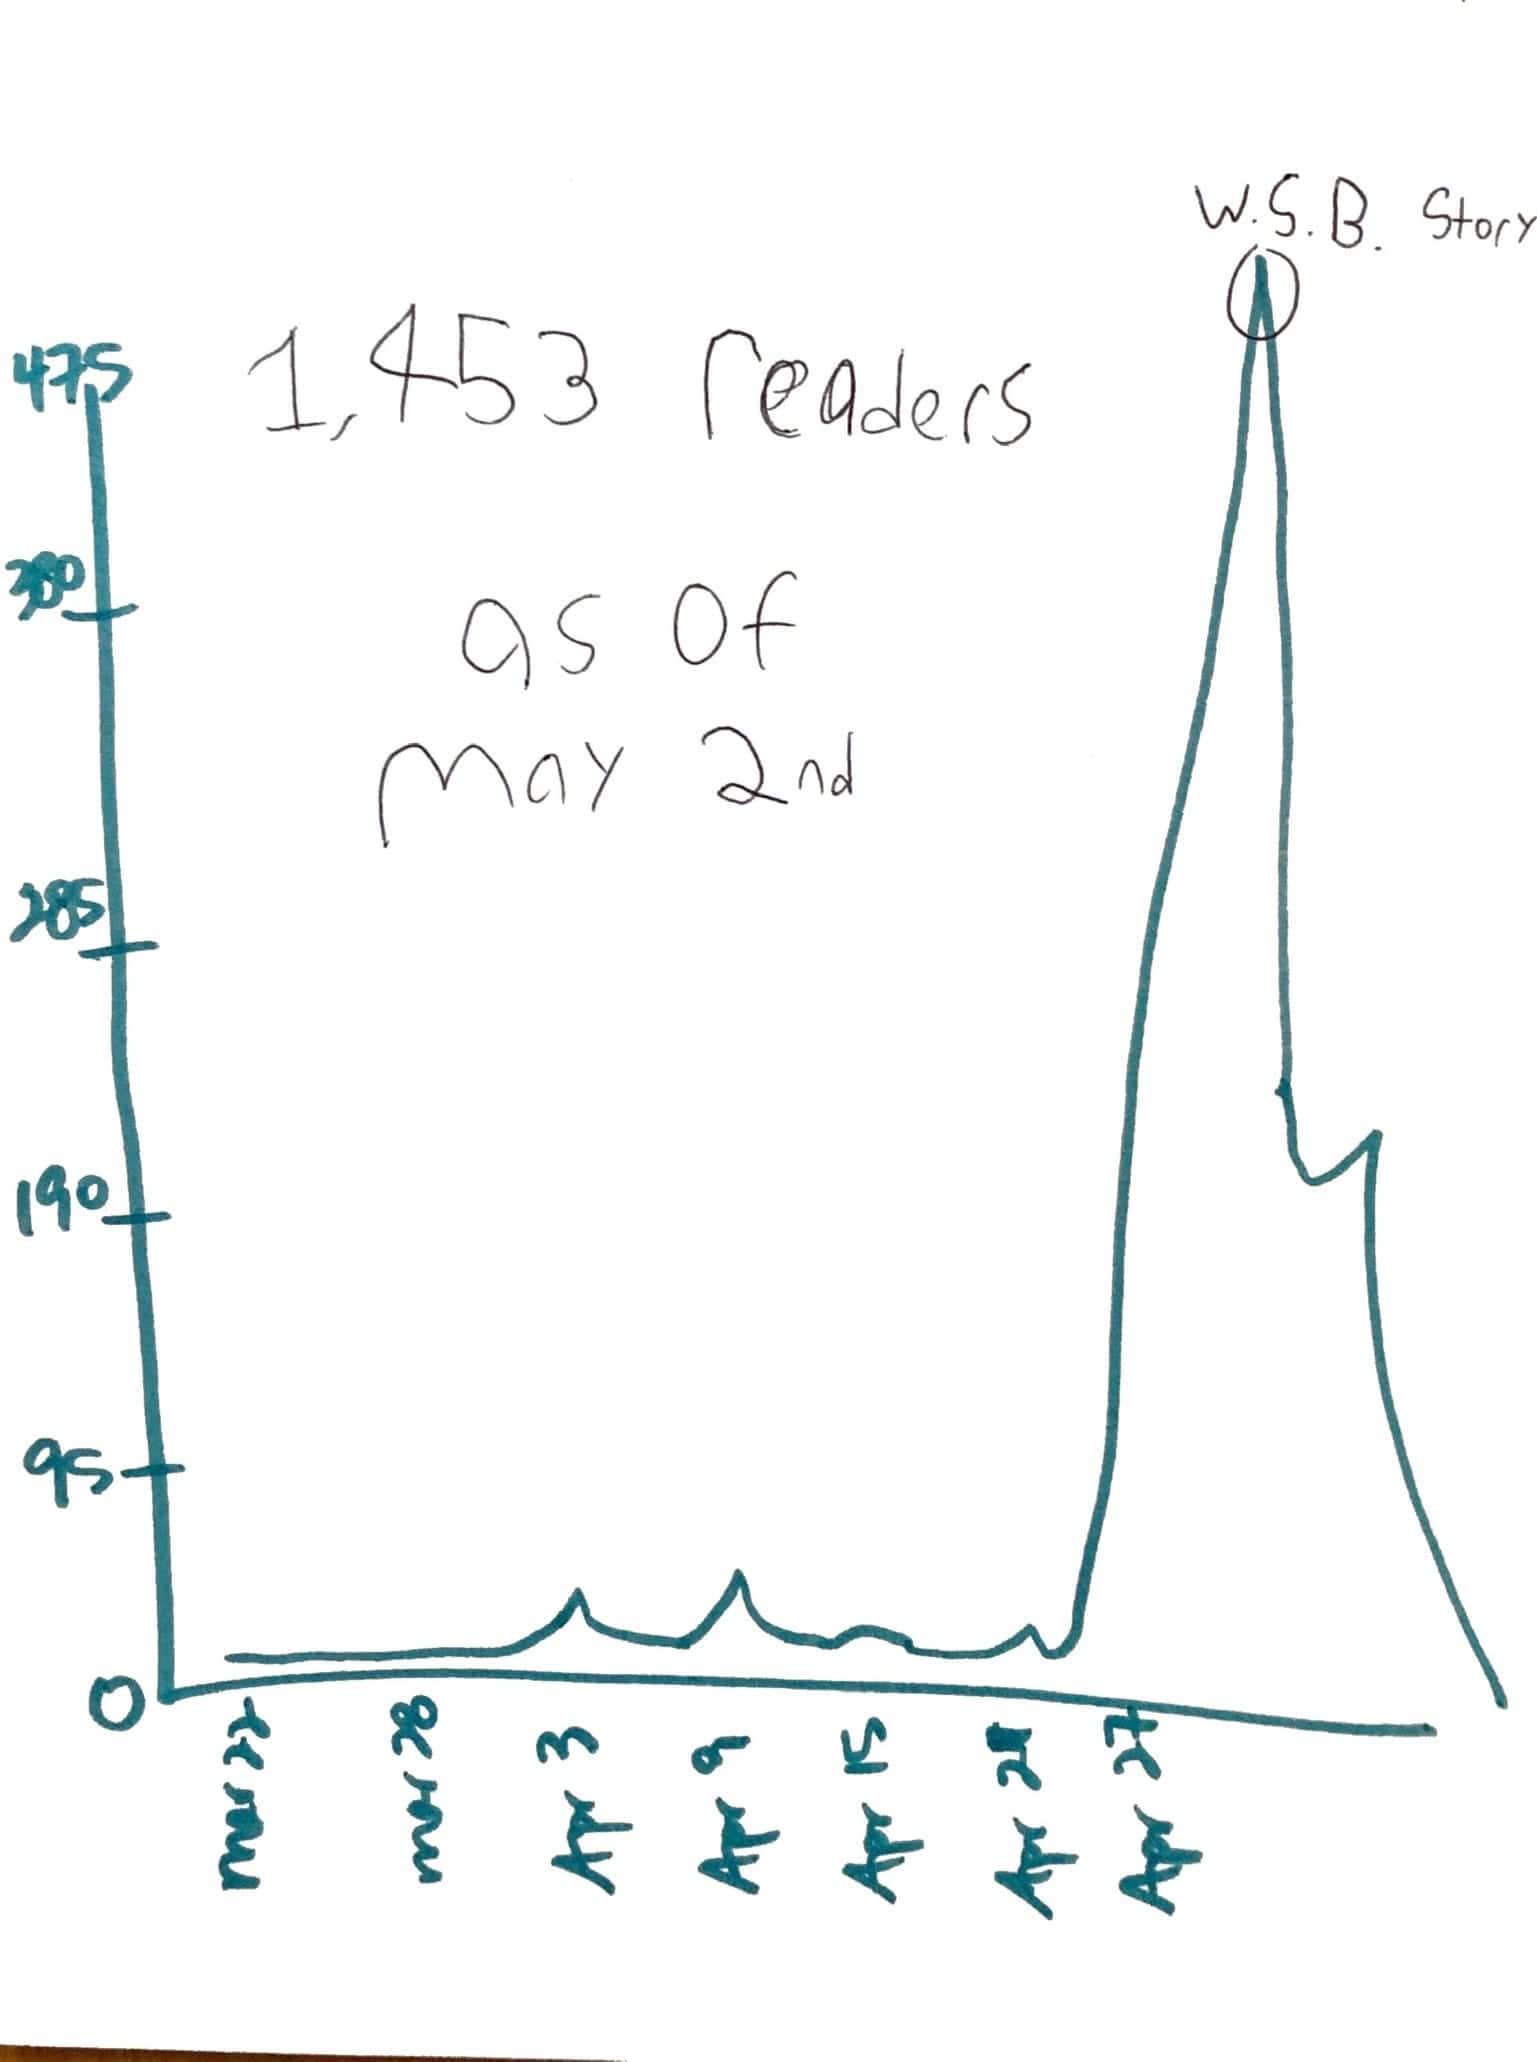 graph of our readership, spiking impressively